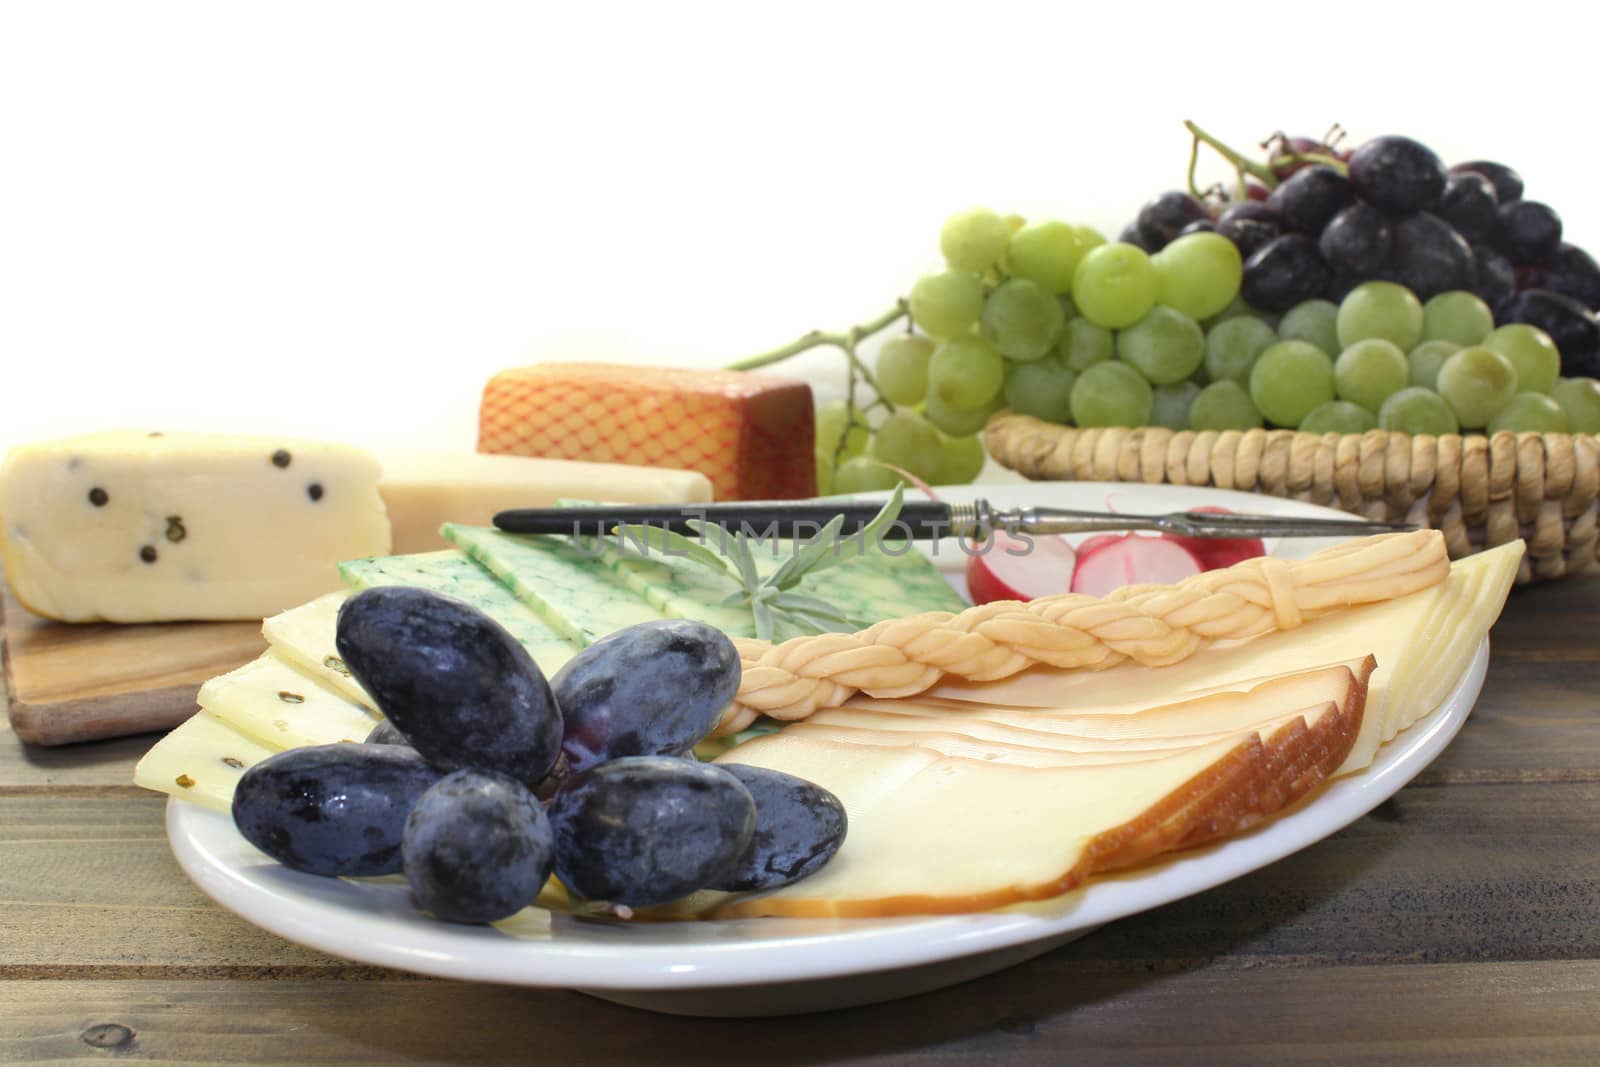 cheese Plate by silencefoto